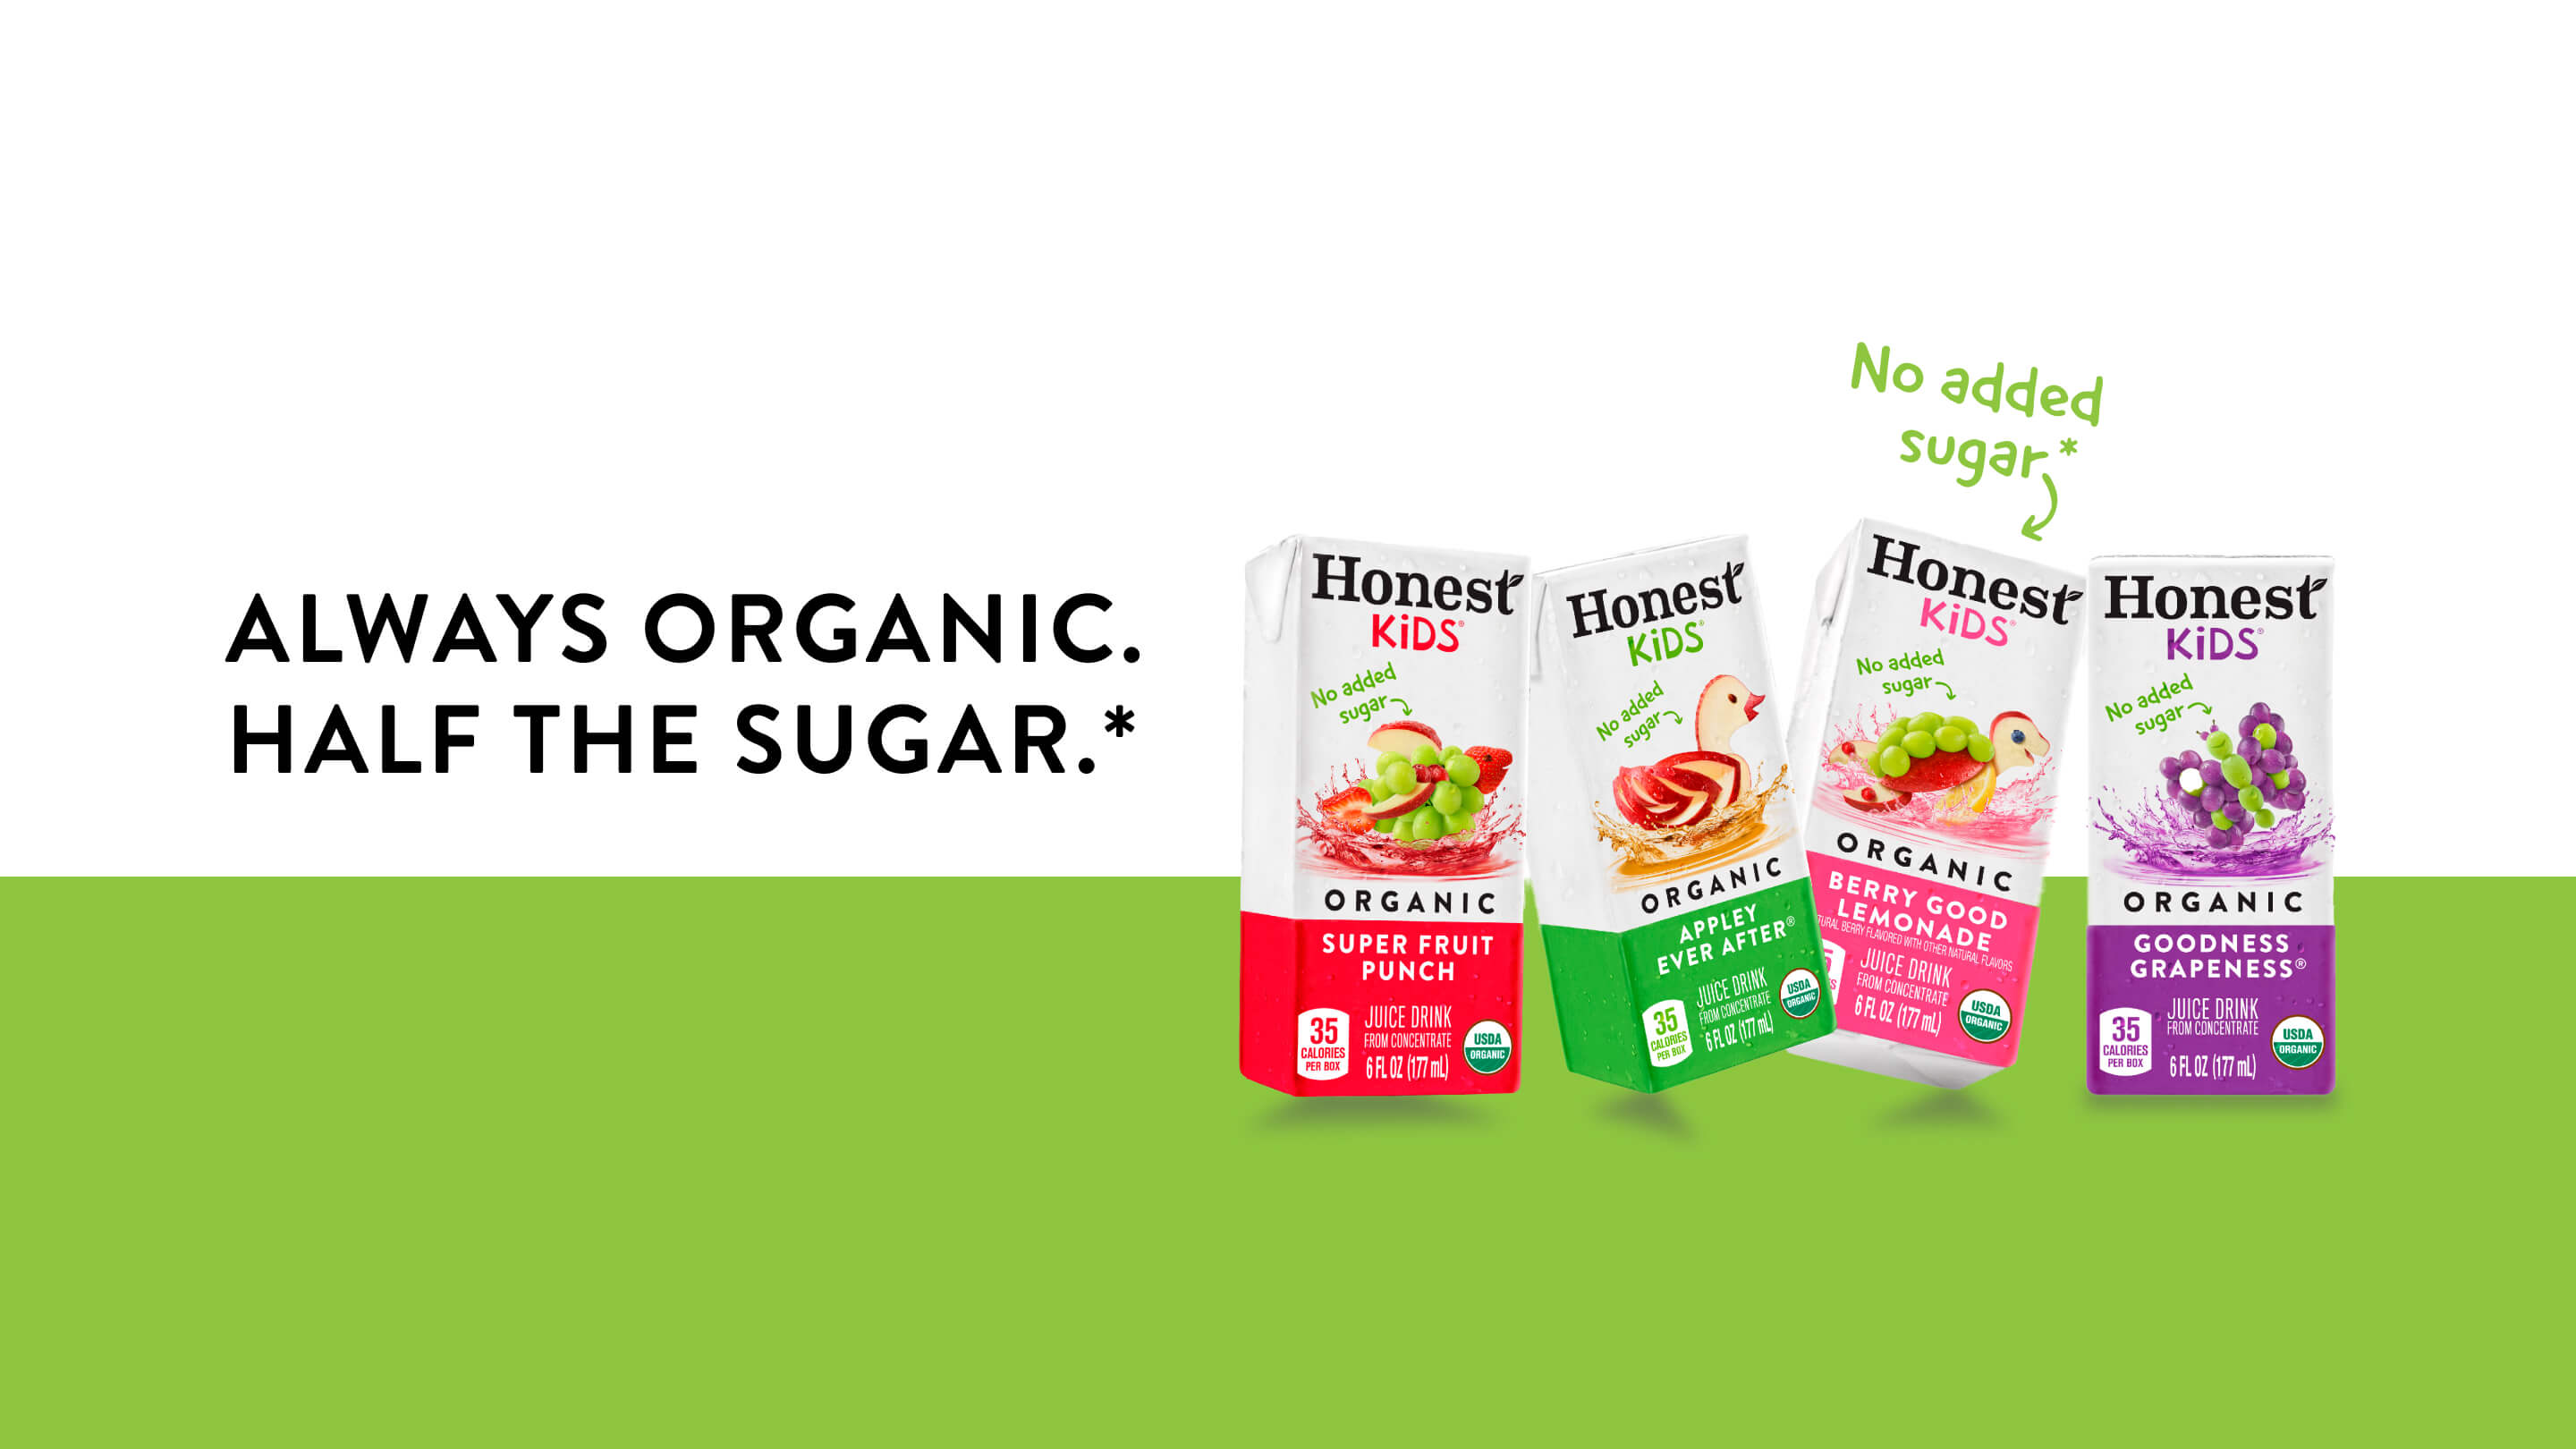 Five different packages of Honest Kids, with the phrase "No added sugar" pointing to one of the flavors